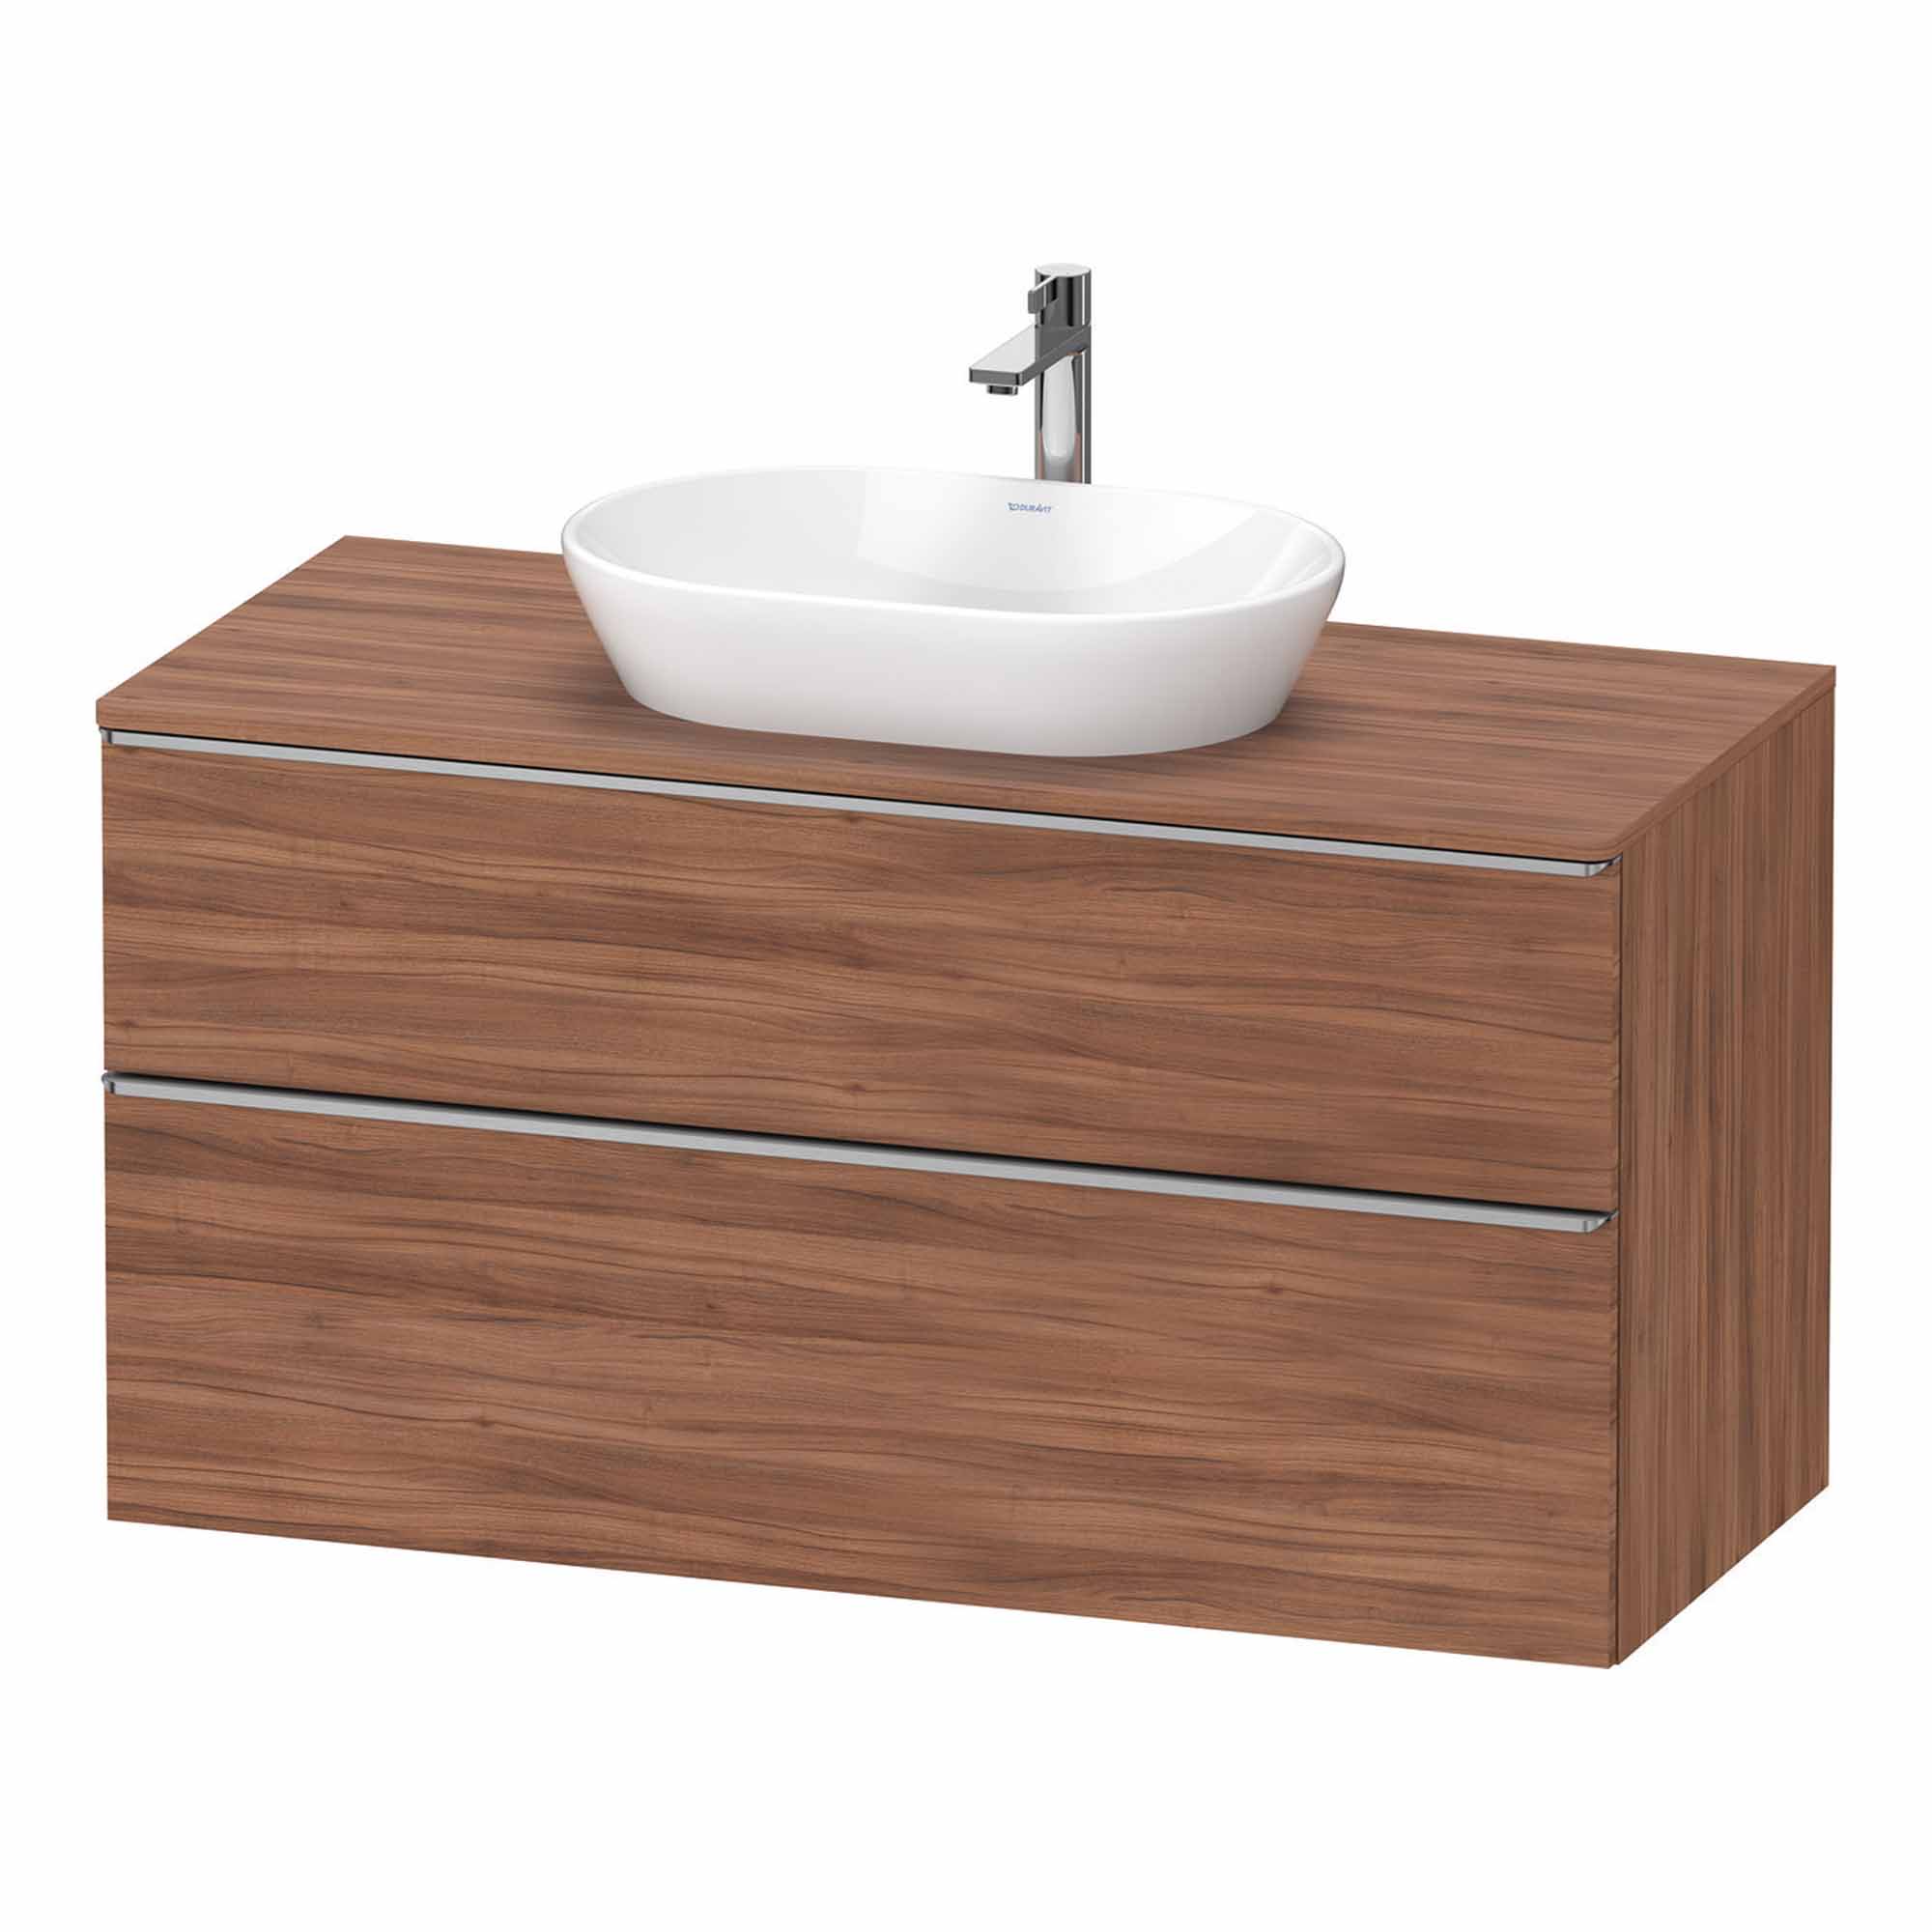 duravit d-neo 1200 wall mounted vanity unit with-worktop walnut stainless steel handles